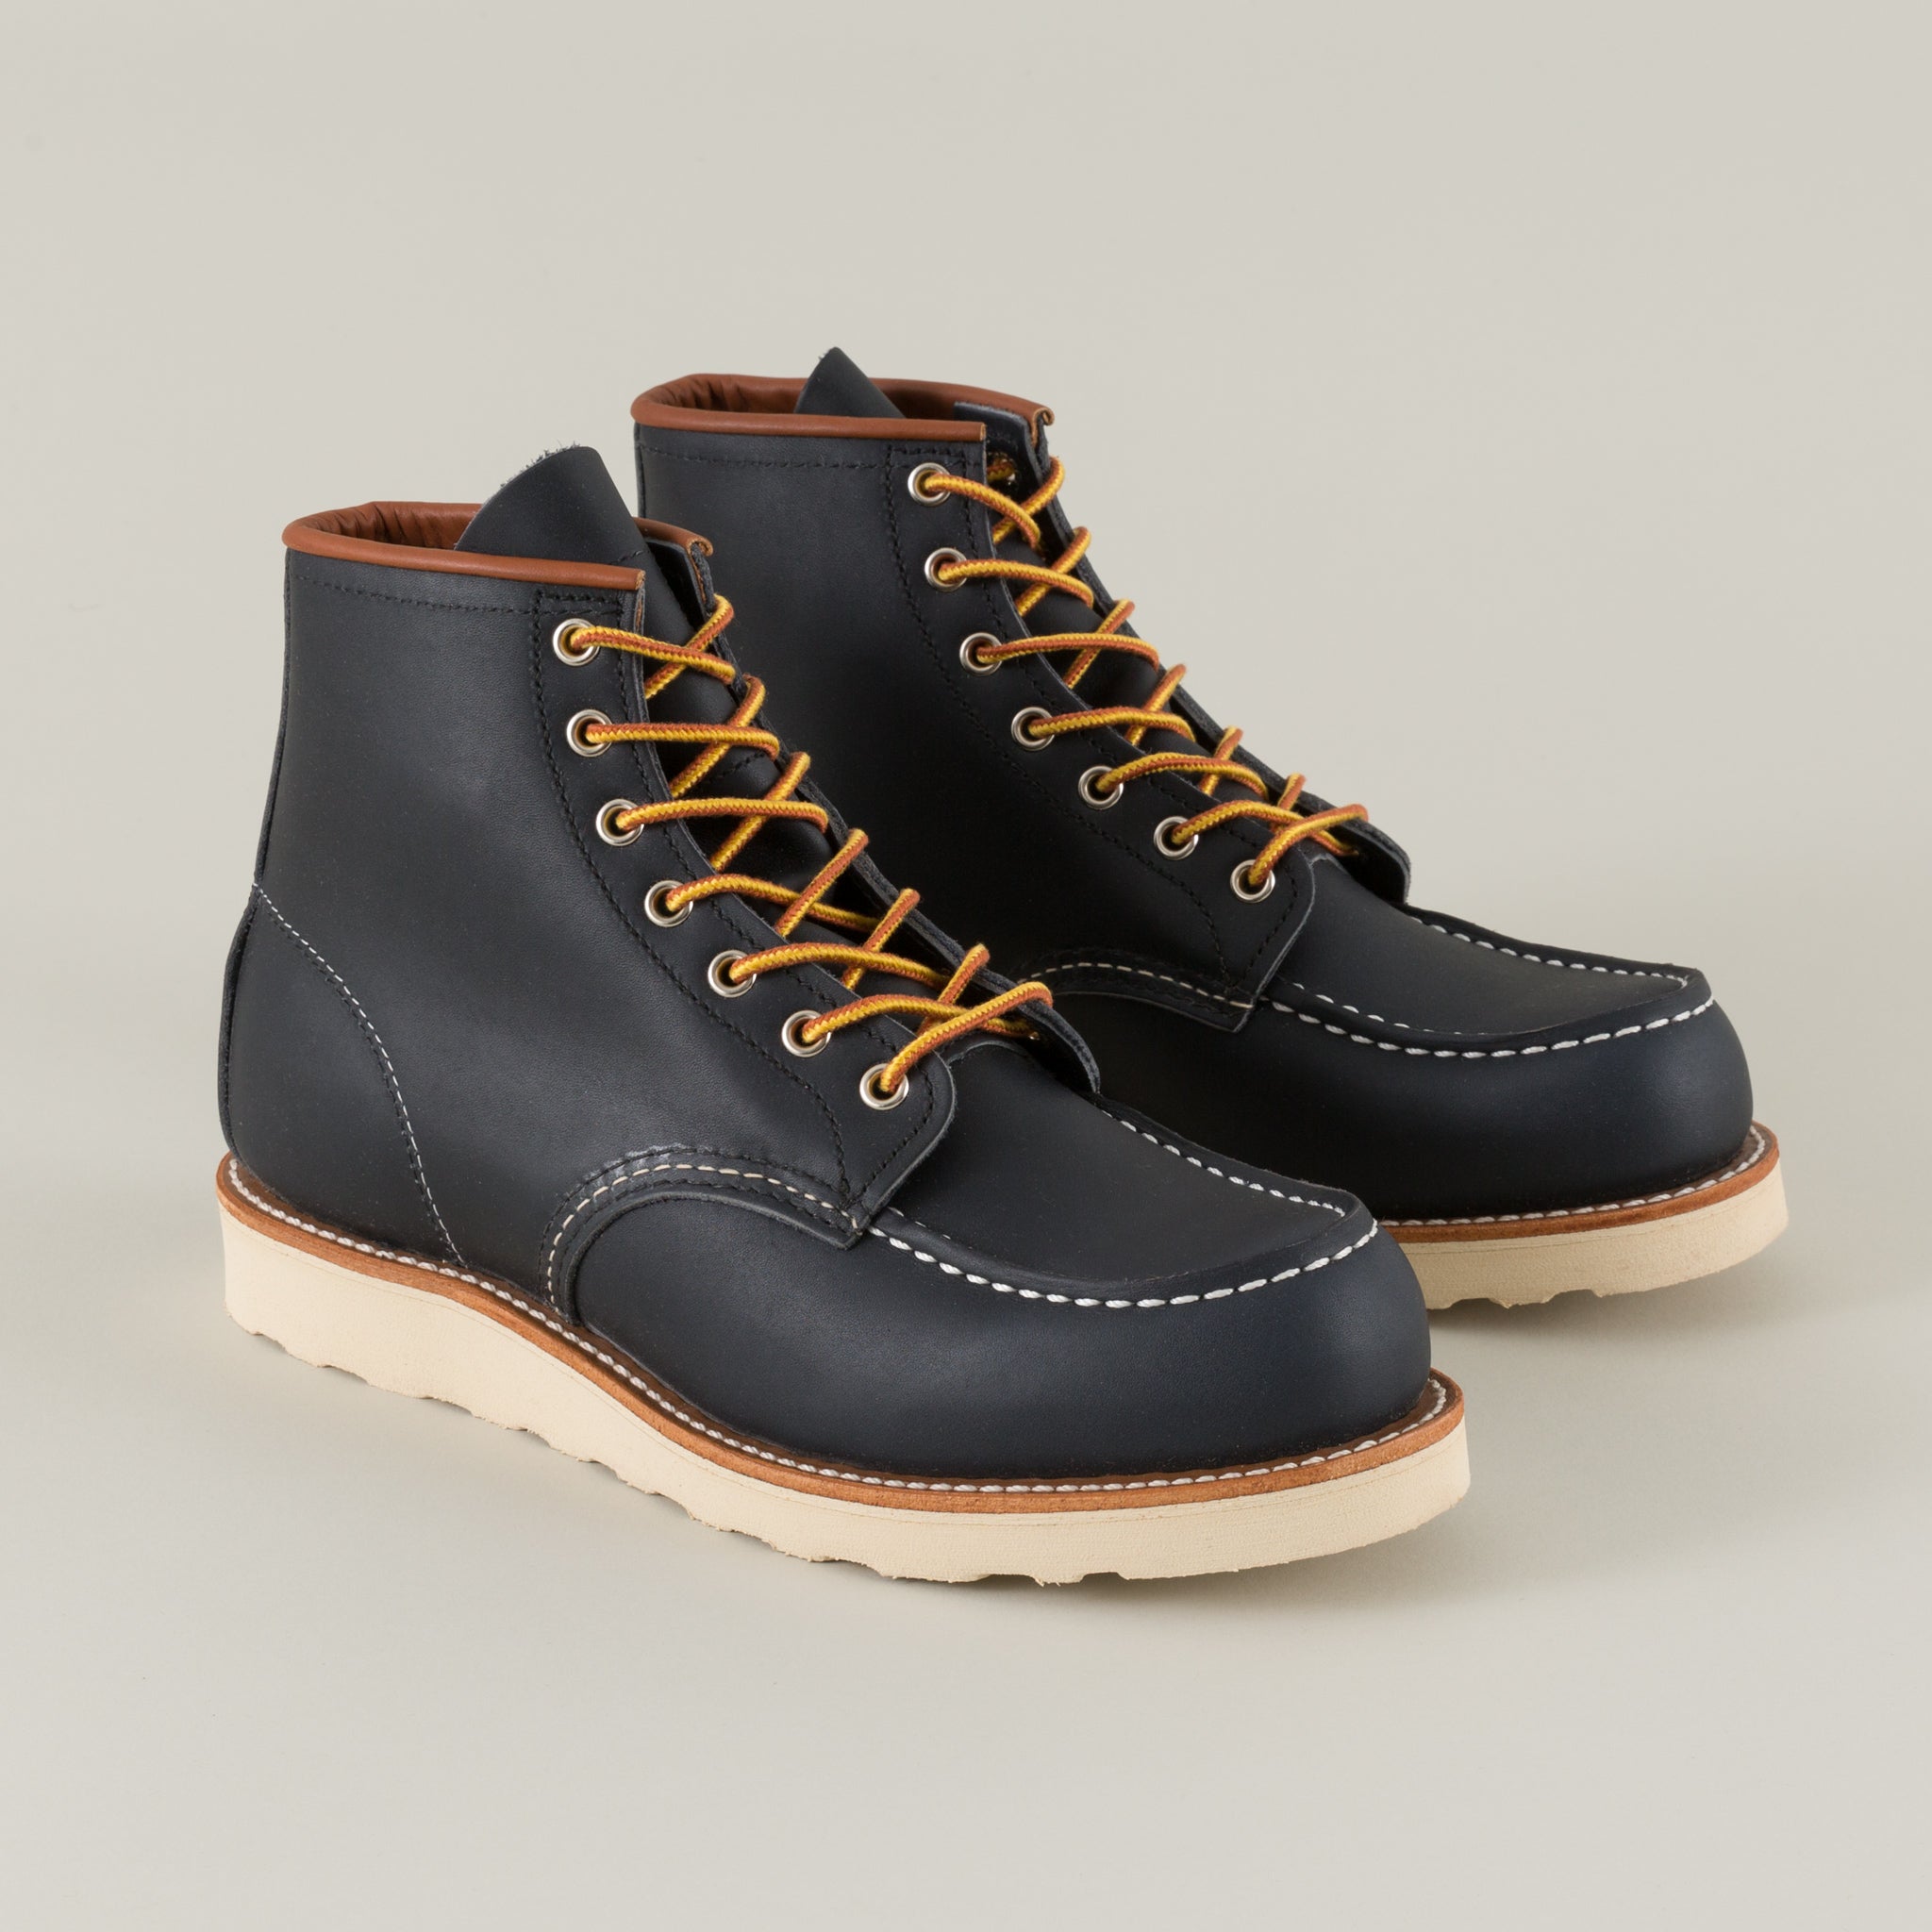 navy red wing boots